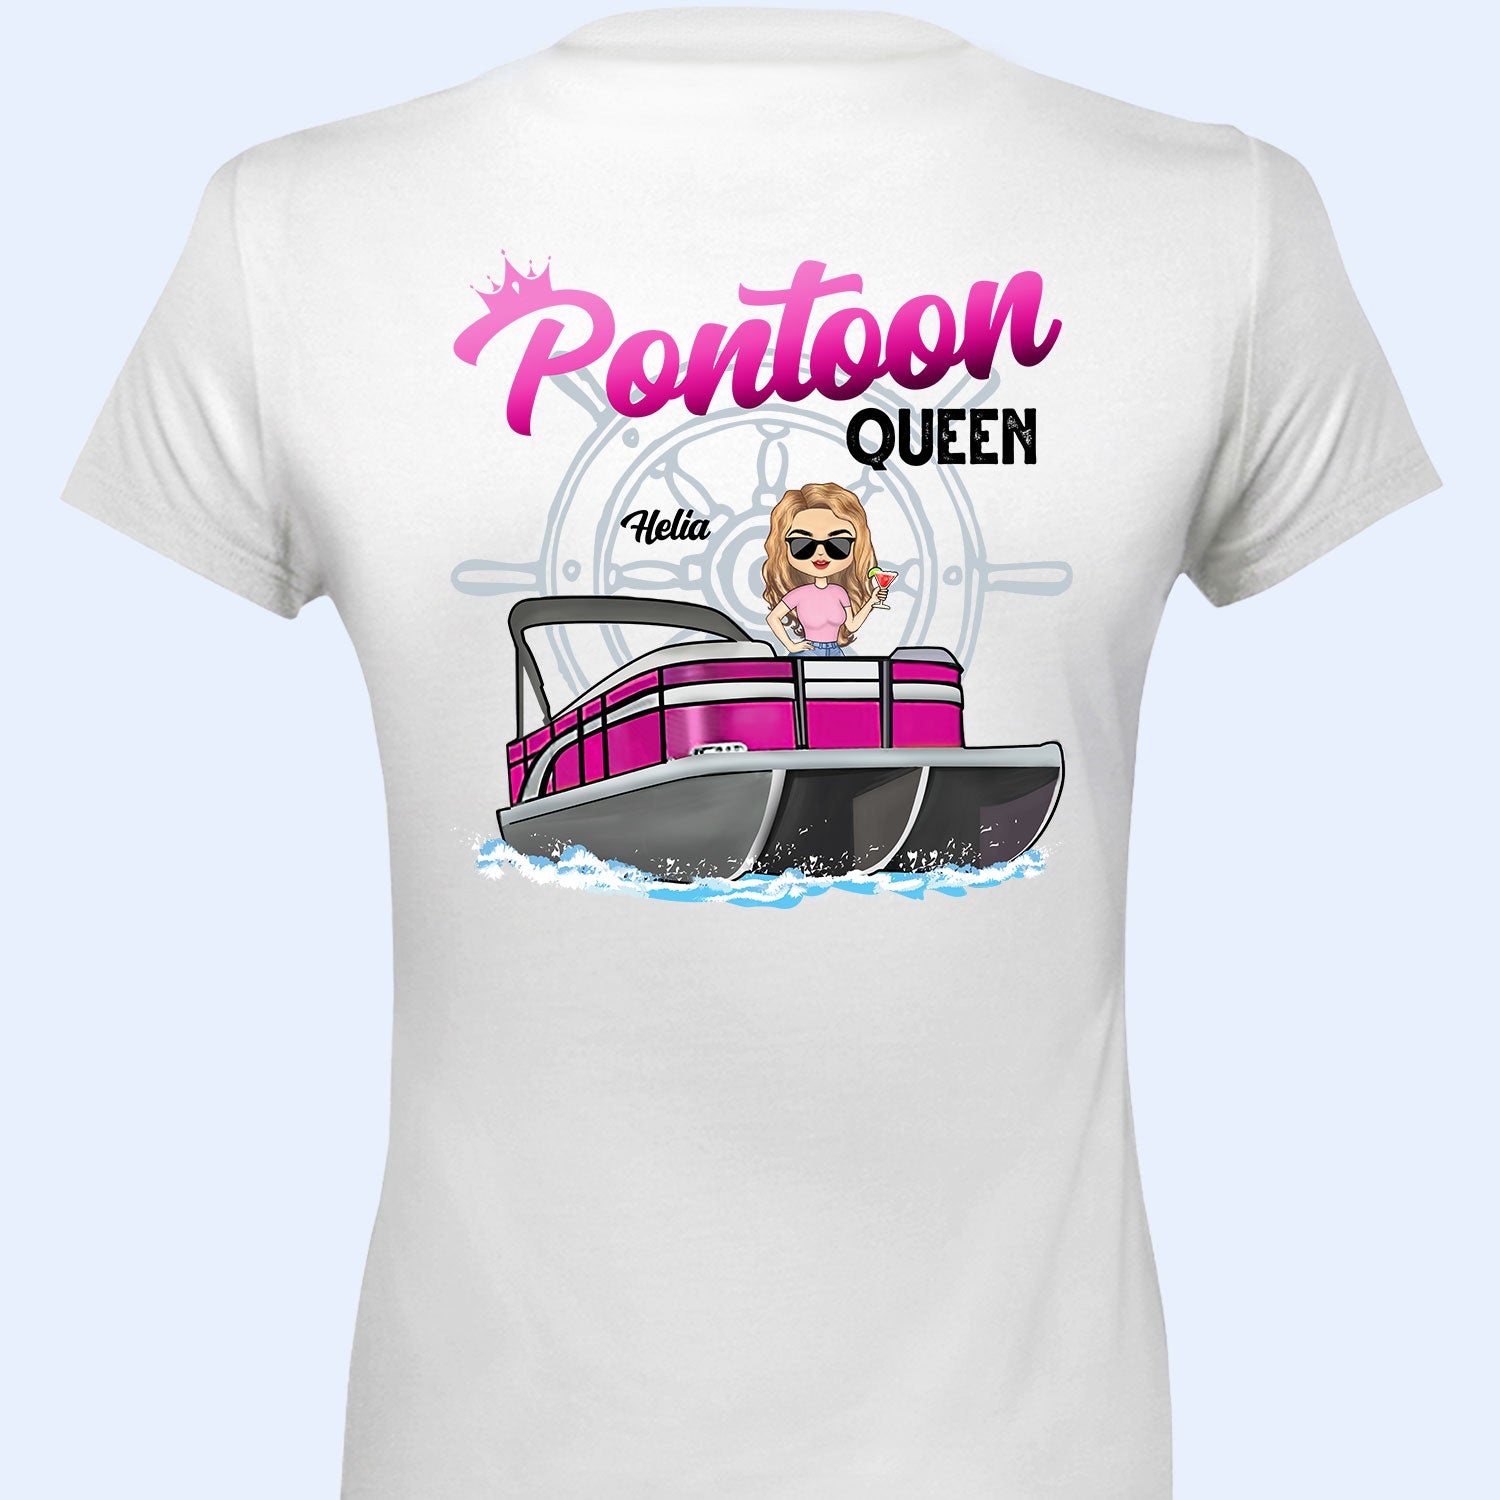 Boating Pontoon Queen - Birthday Gift For Women, Pontooning Lovers, Lake Lovers, Travelers - Personalized Custom T Shirt